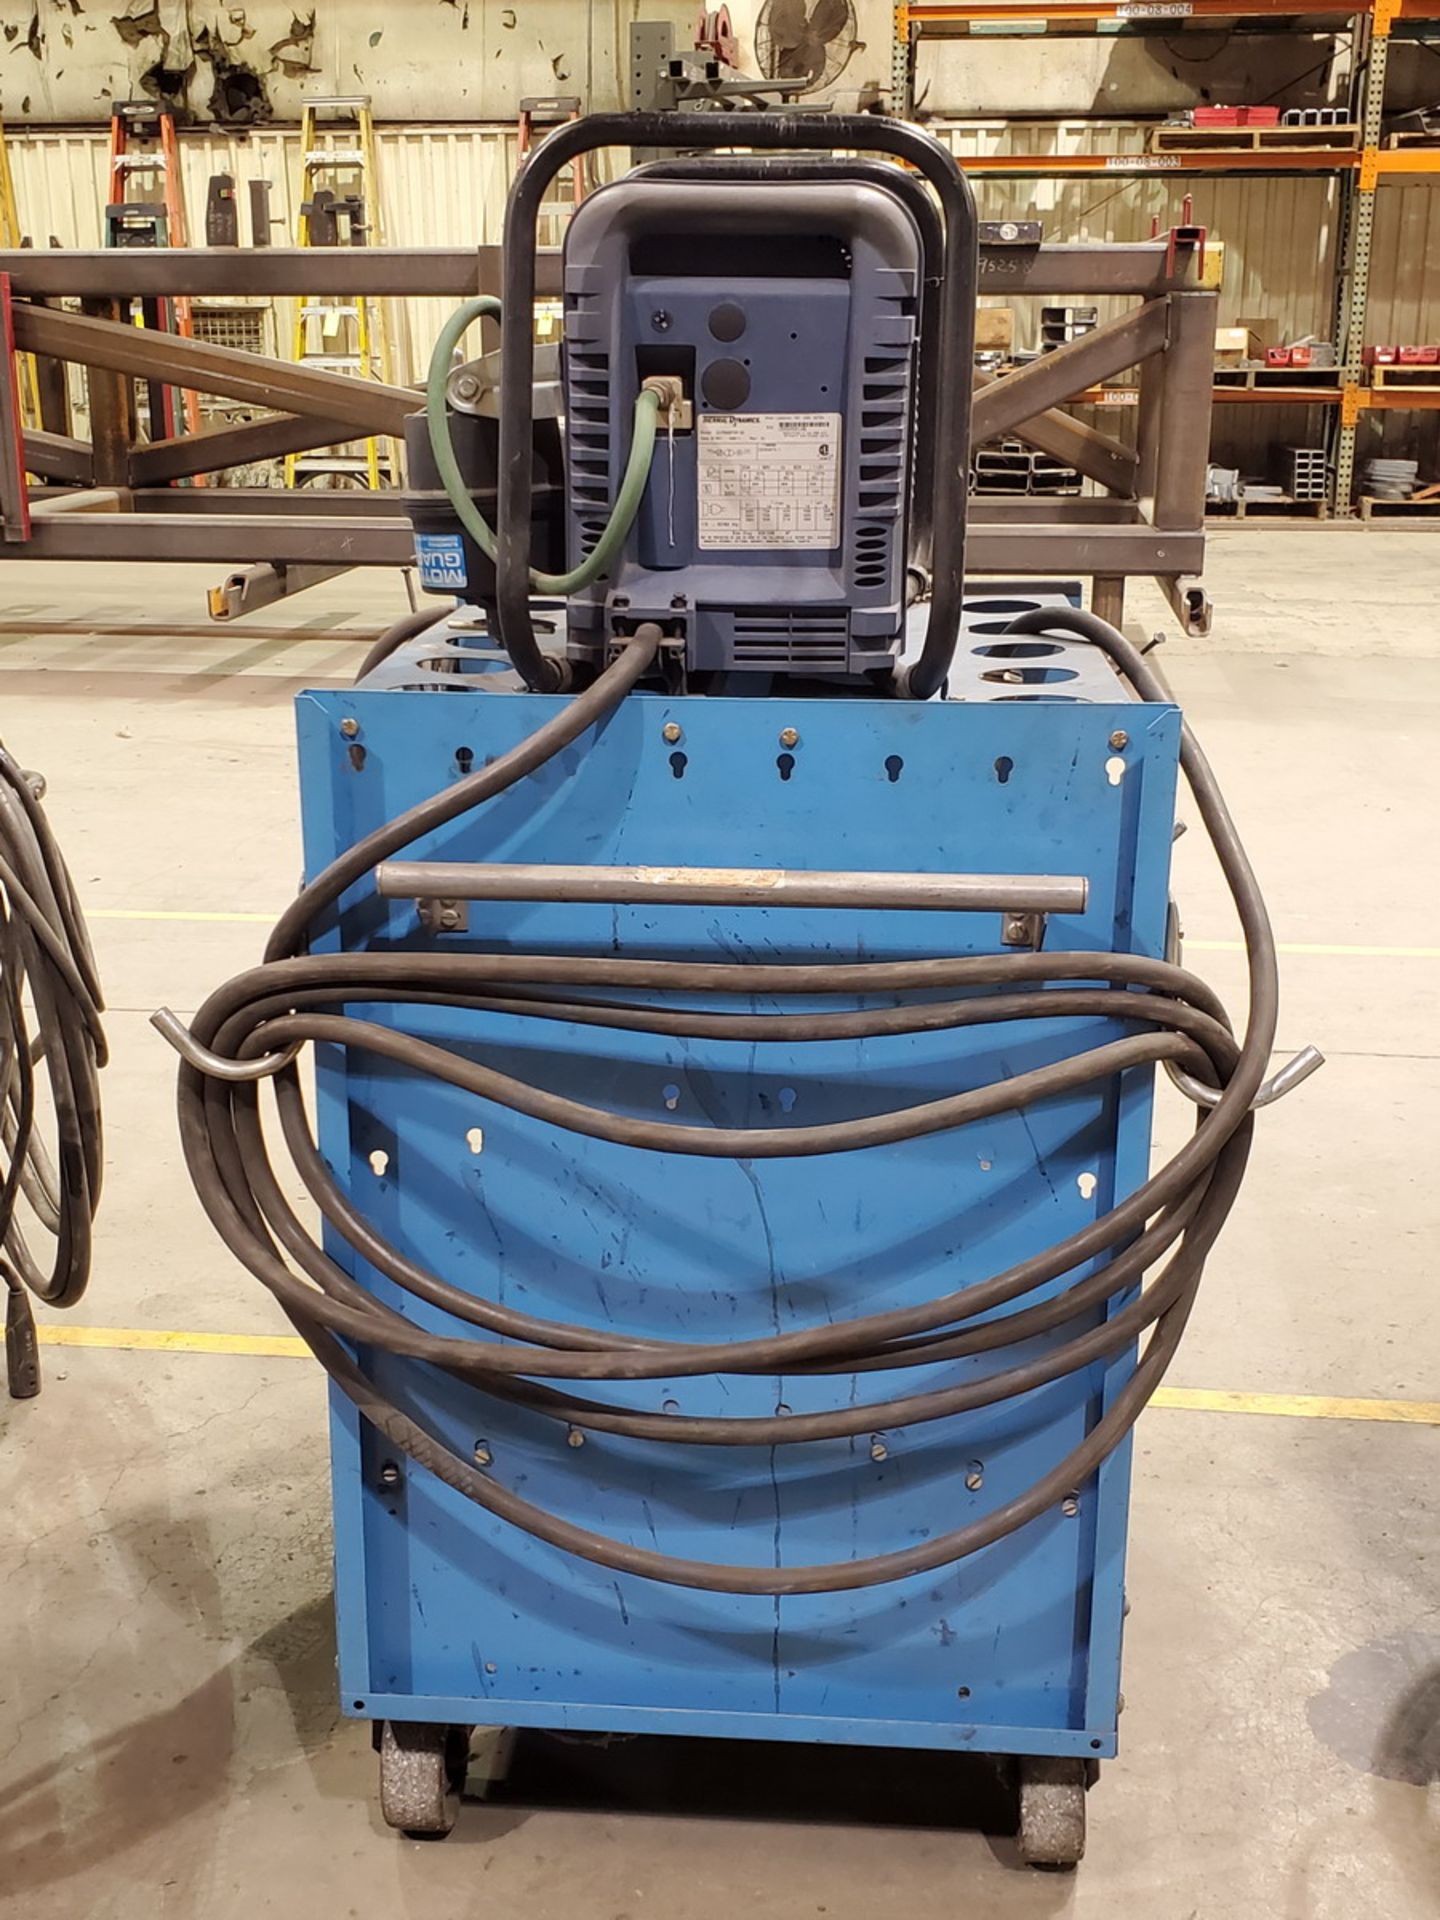 2011 Thermal Dynamics Professional Cutmaster 82 Plasma Cutter 330V, 50/60HZ, 80A, 1/3 HP - Image 3 of 3